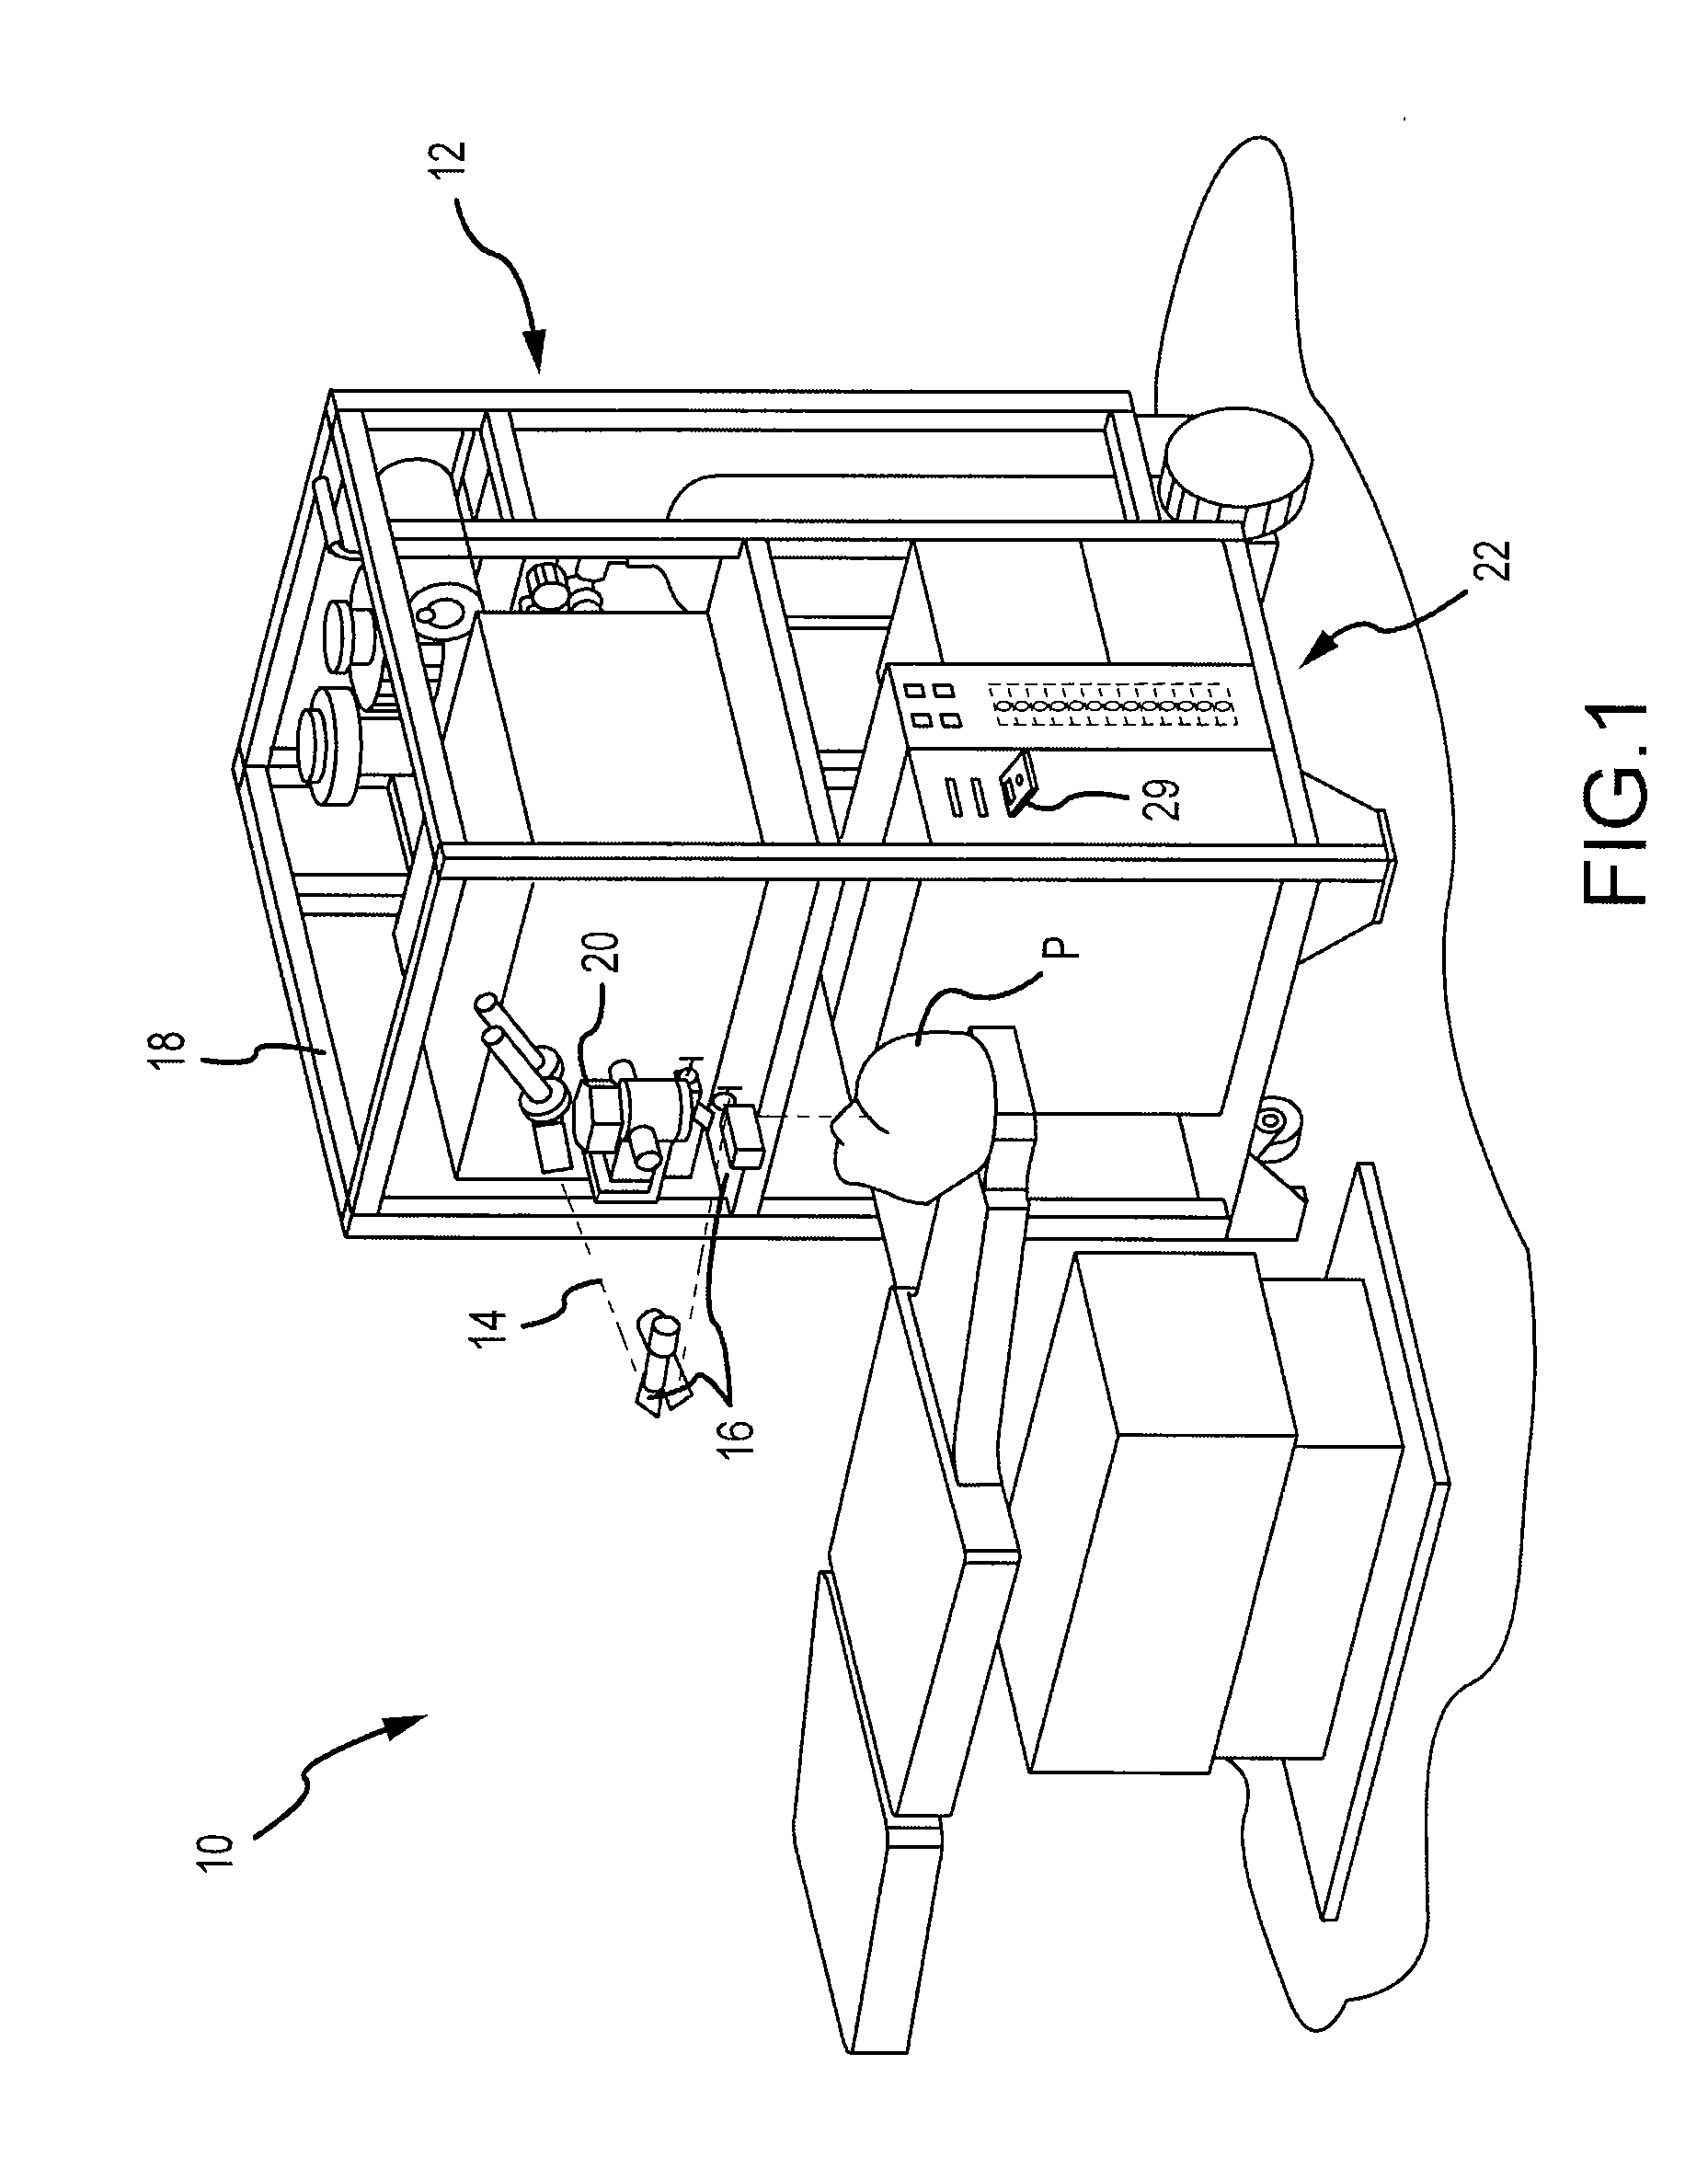 Combined wavefront and topography systems and methods